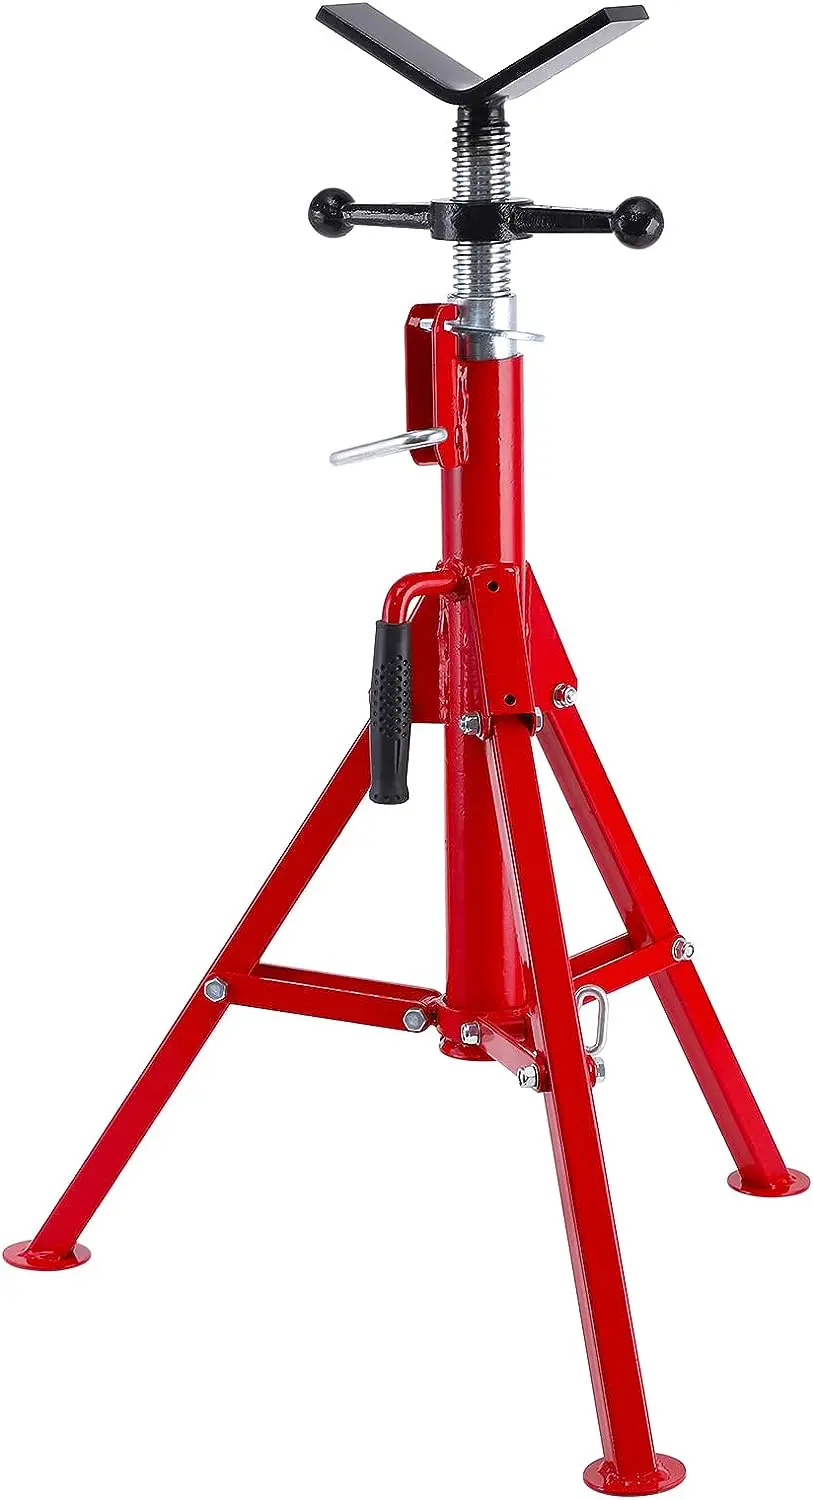 

Pipe Jack Stand,28-52 Inch Adjustable Height,1/8"-12" Capacity, 2500 lb Load Capacity,Heavy Duty Carbon Steel Body, Stee